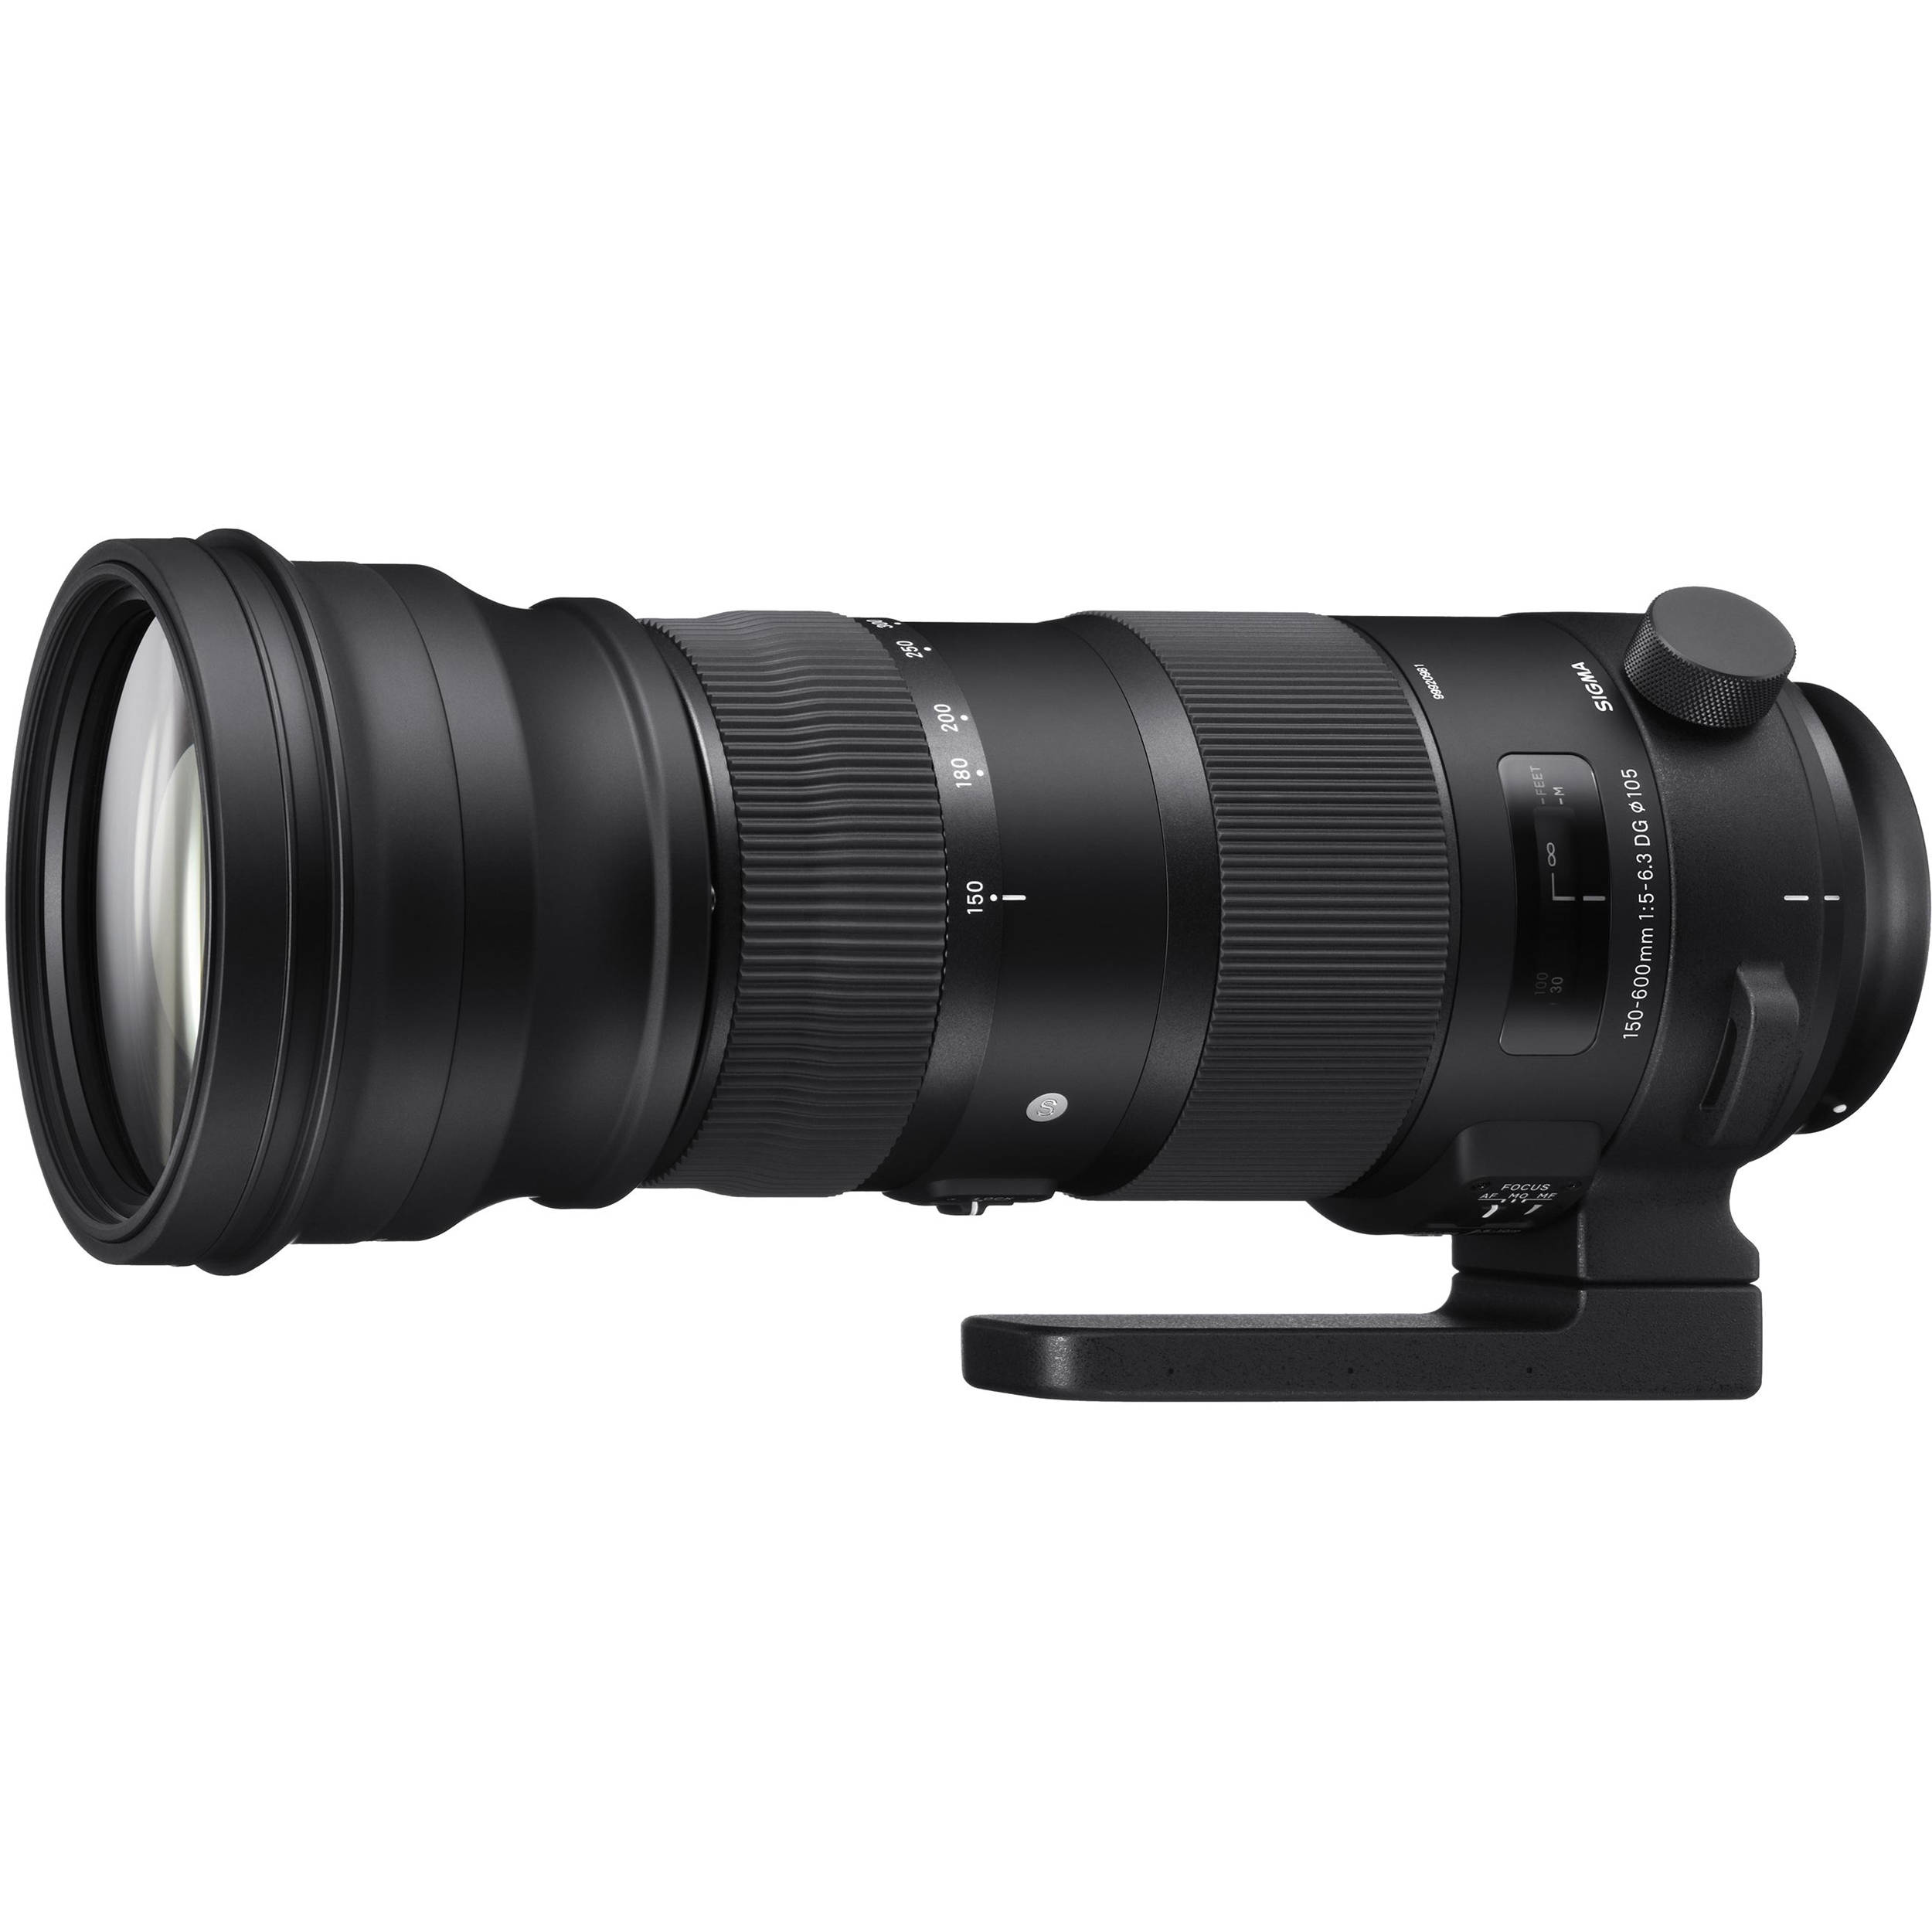 Hot Deal Back – Sigma 150-600mm f/5-6.3 DG OS HSM Contemporary Lens for $789 at Adorama !